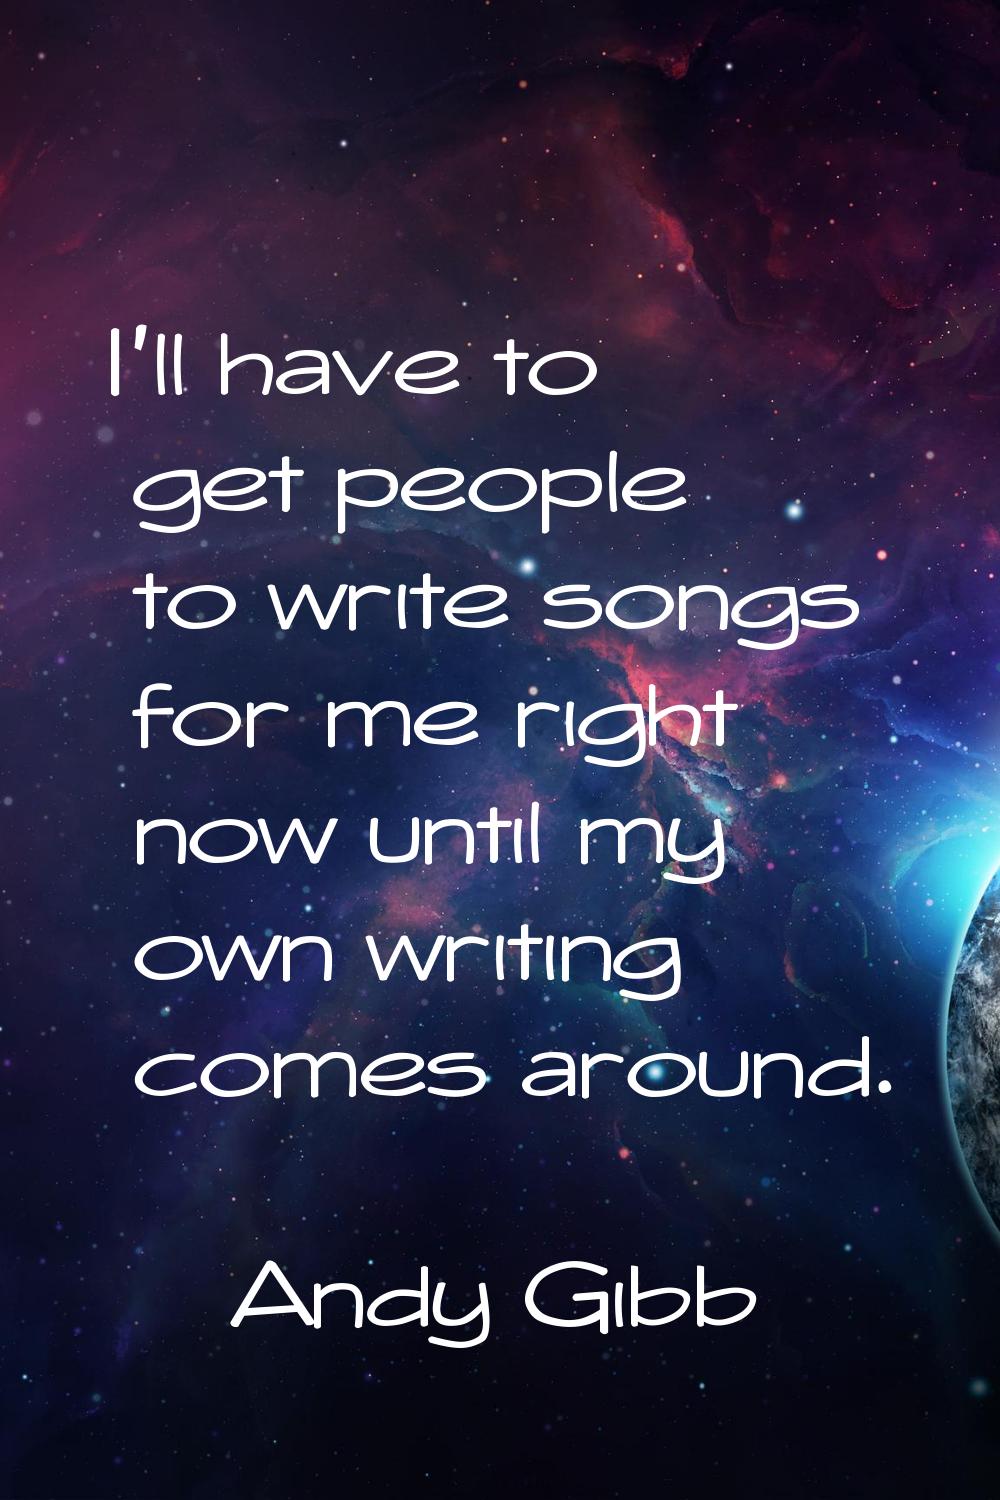 I'll have to get people to write songs for me right now until my own writing comes around.